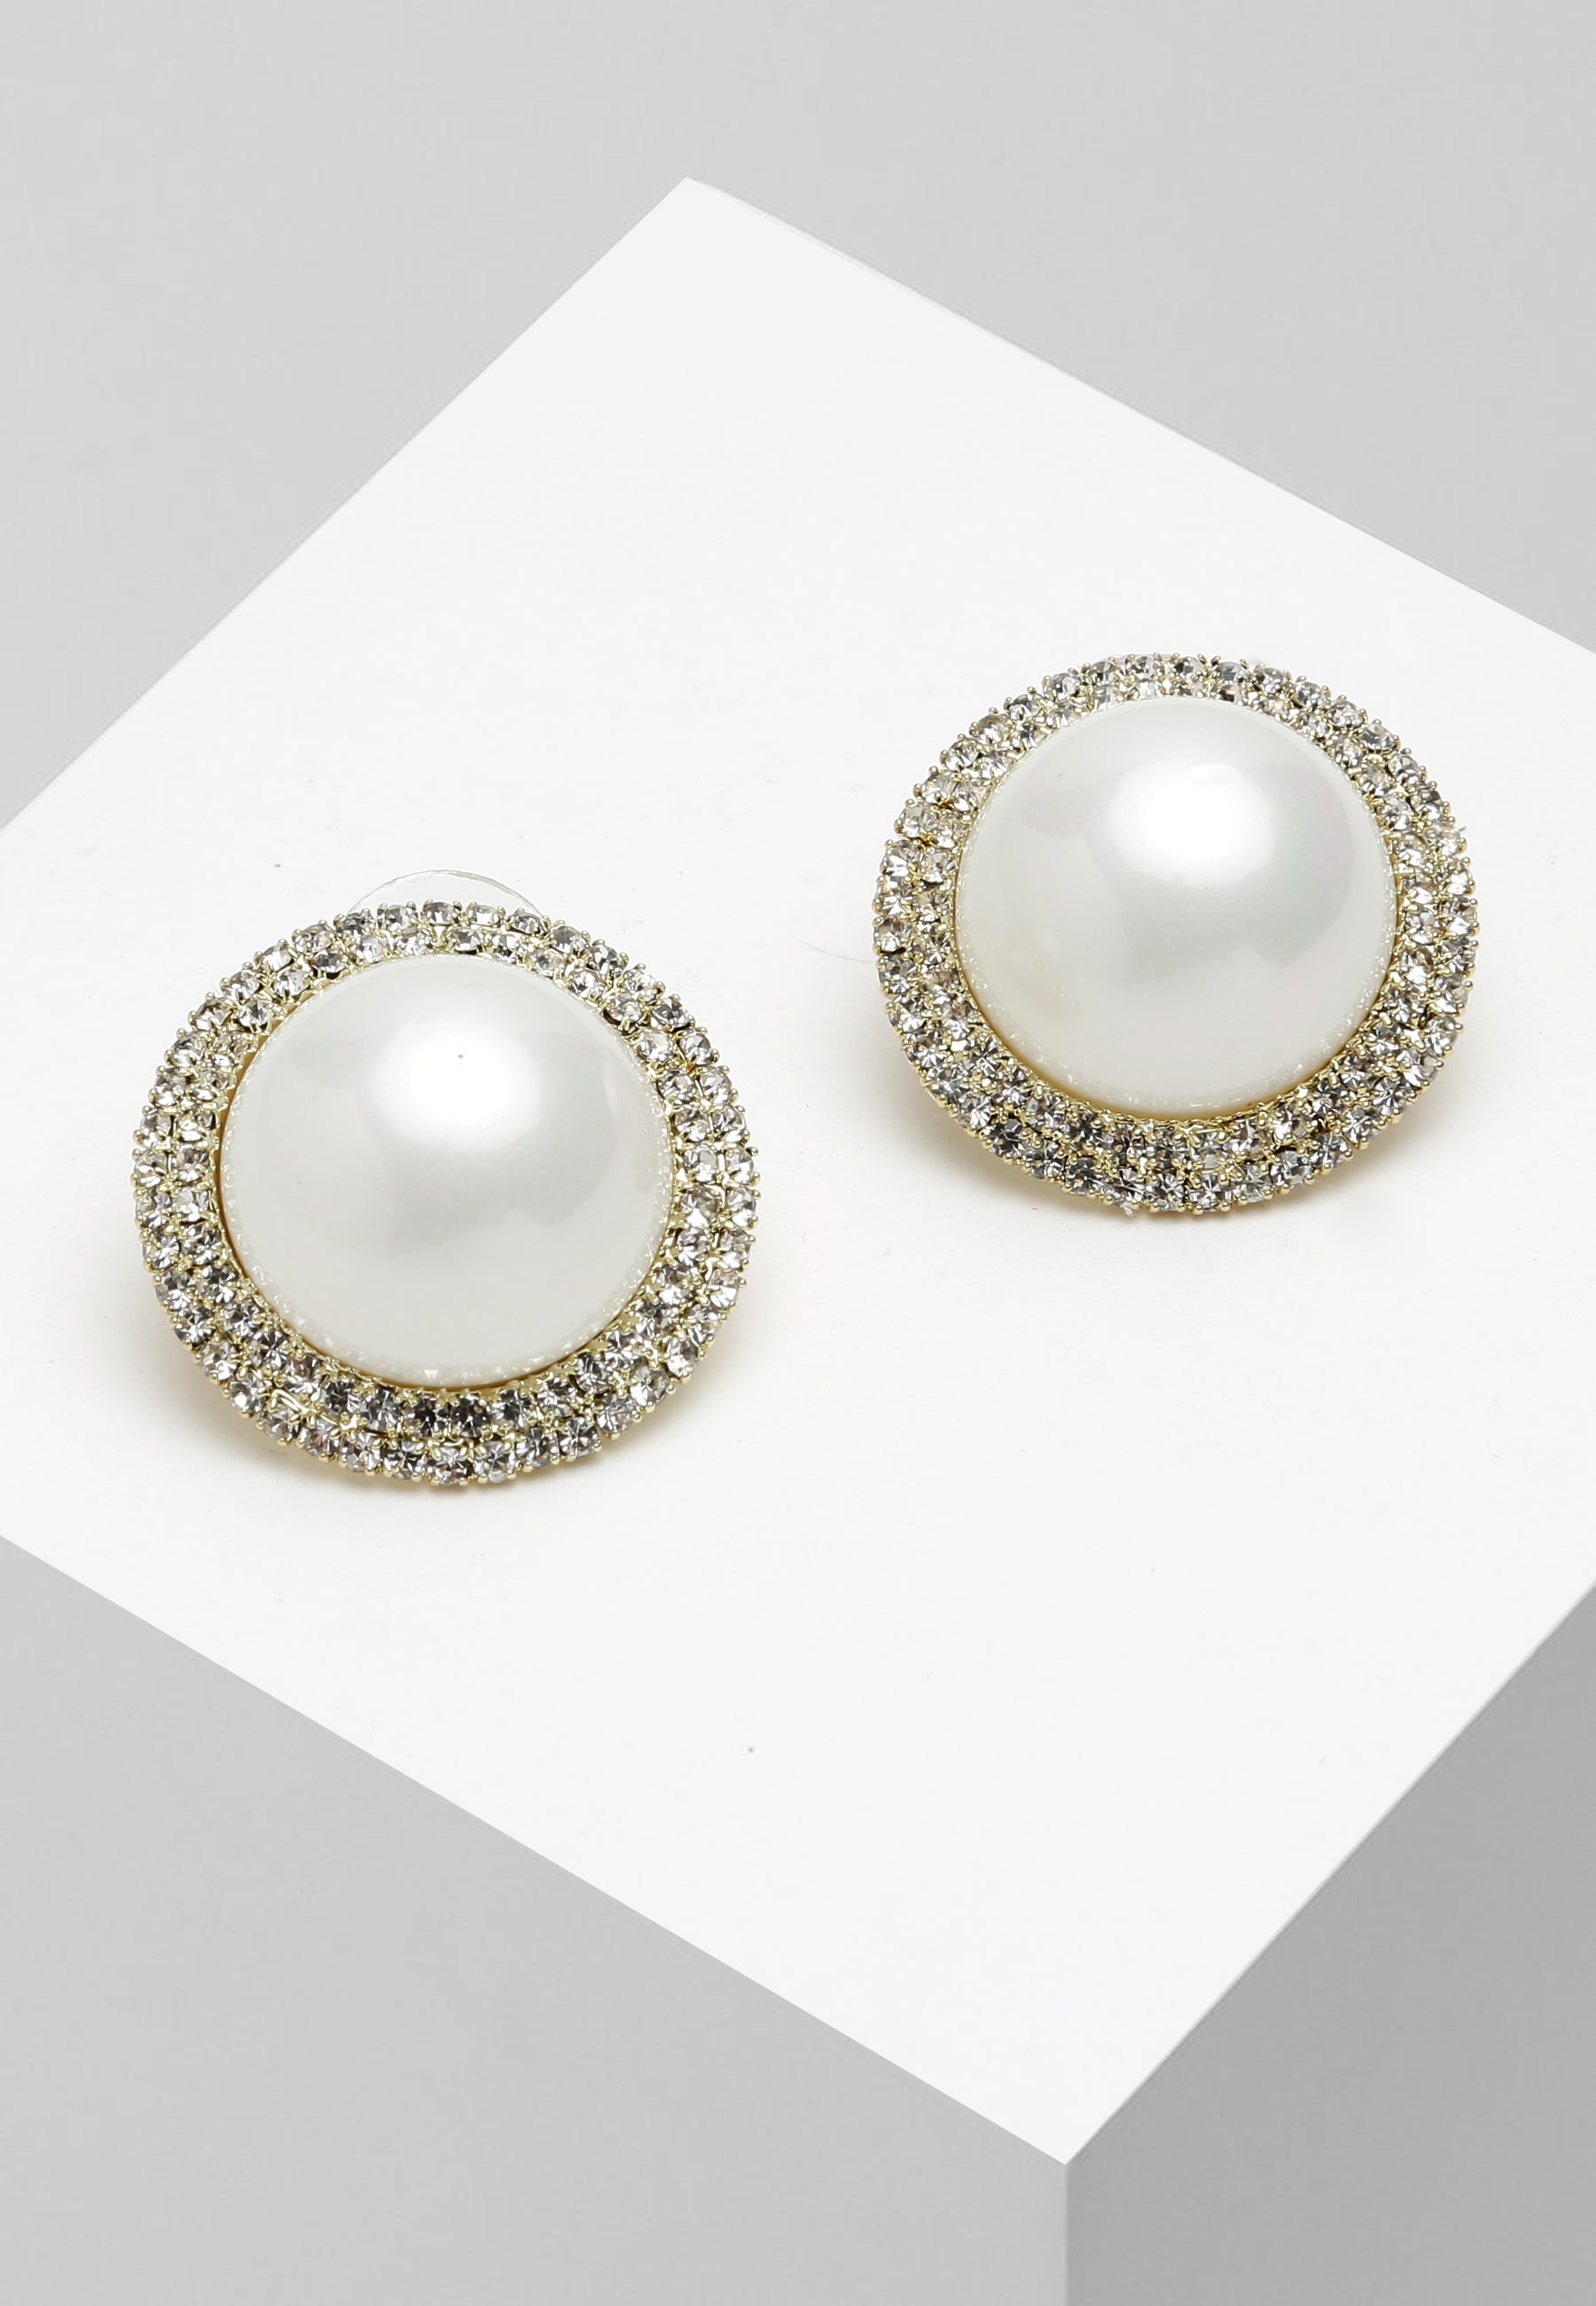 Gold-Plated Oval studs